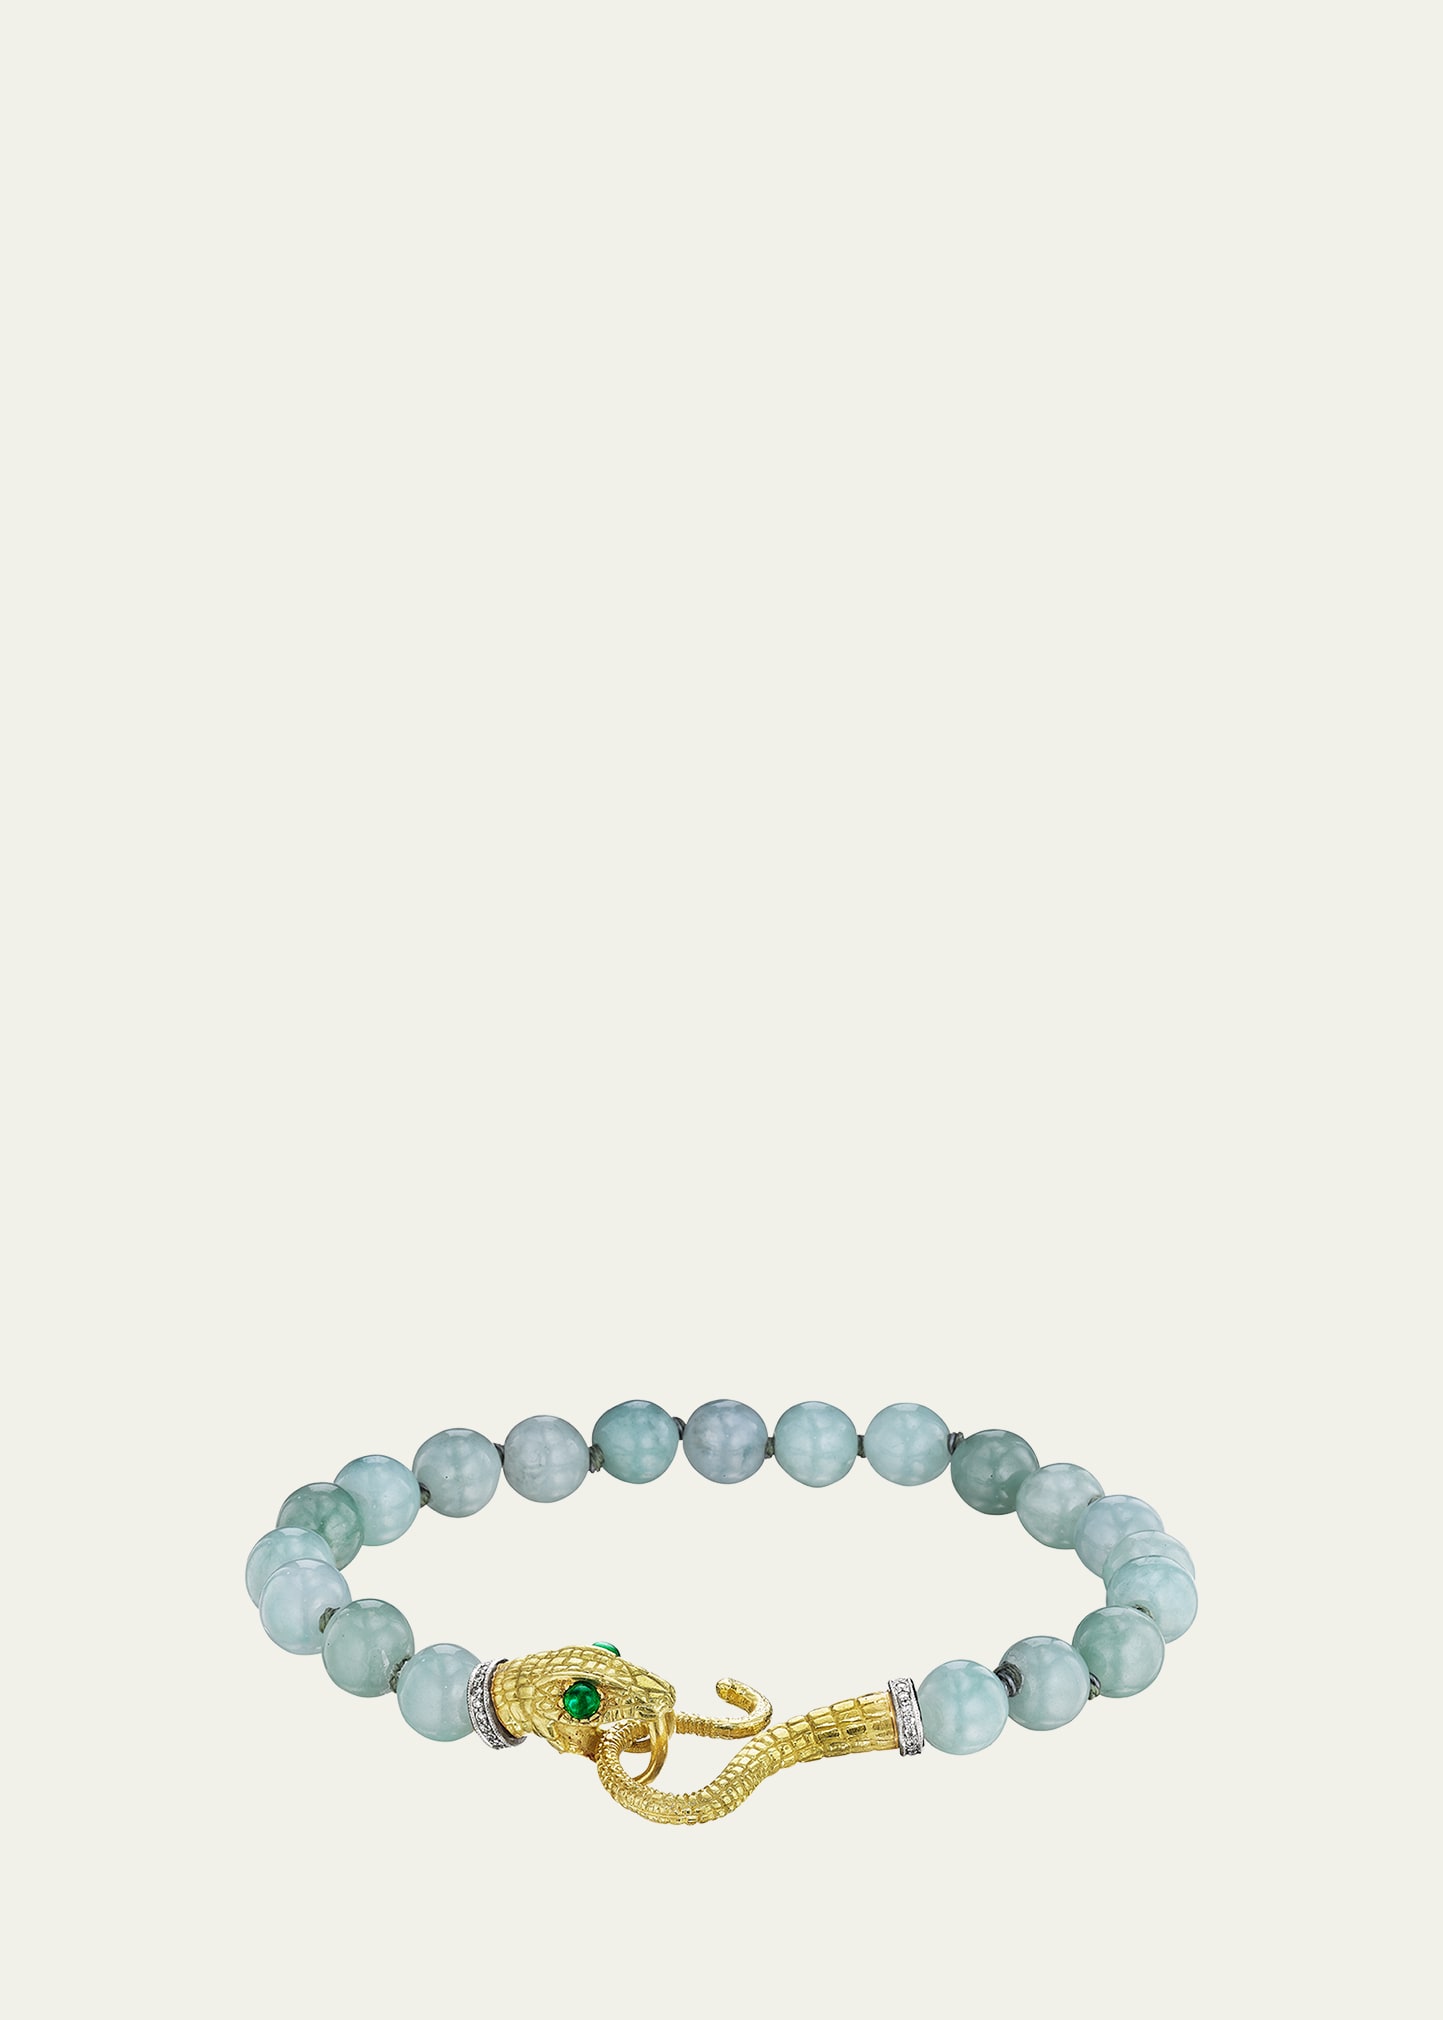 Anthony Lent Jadeite Bead Serpent Bracelet In 18k Gold With Diamonds And Emeralds In Yg